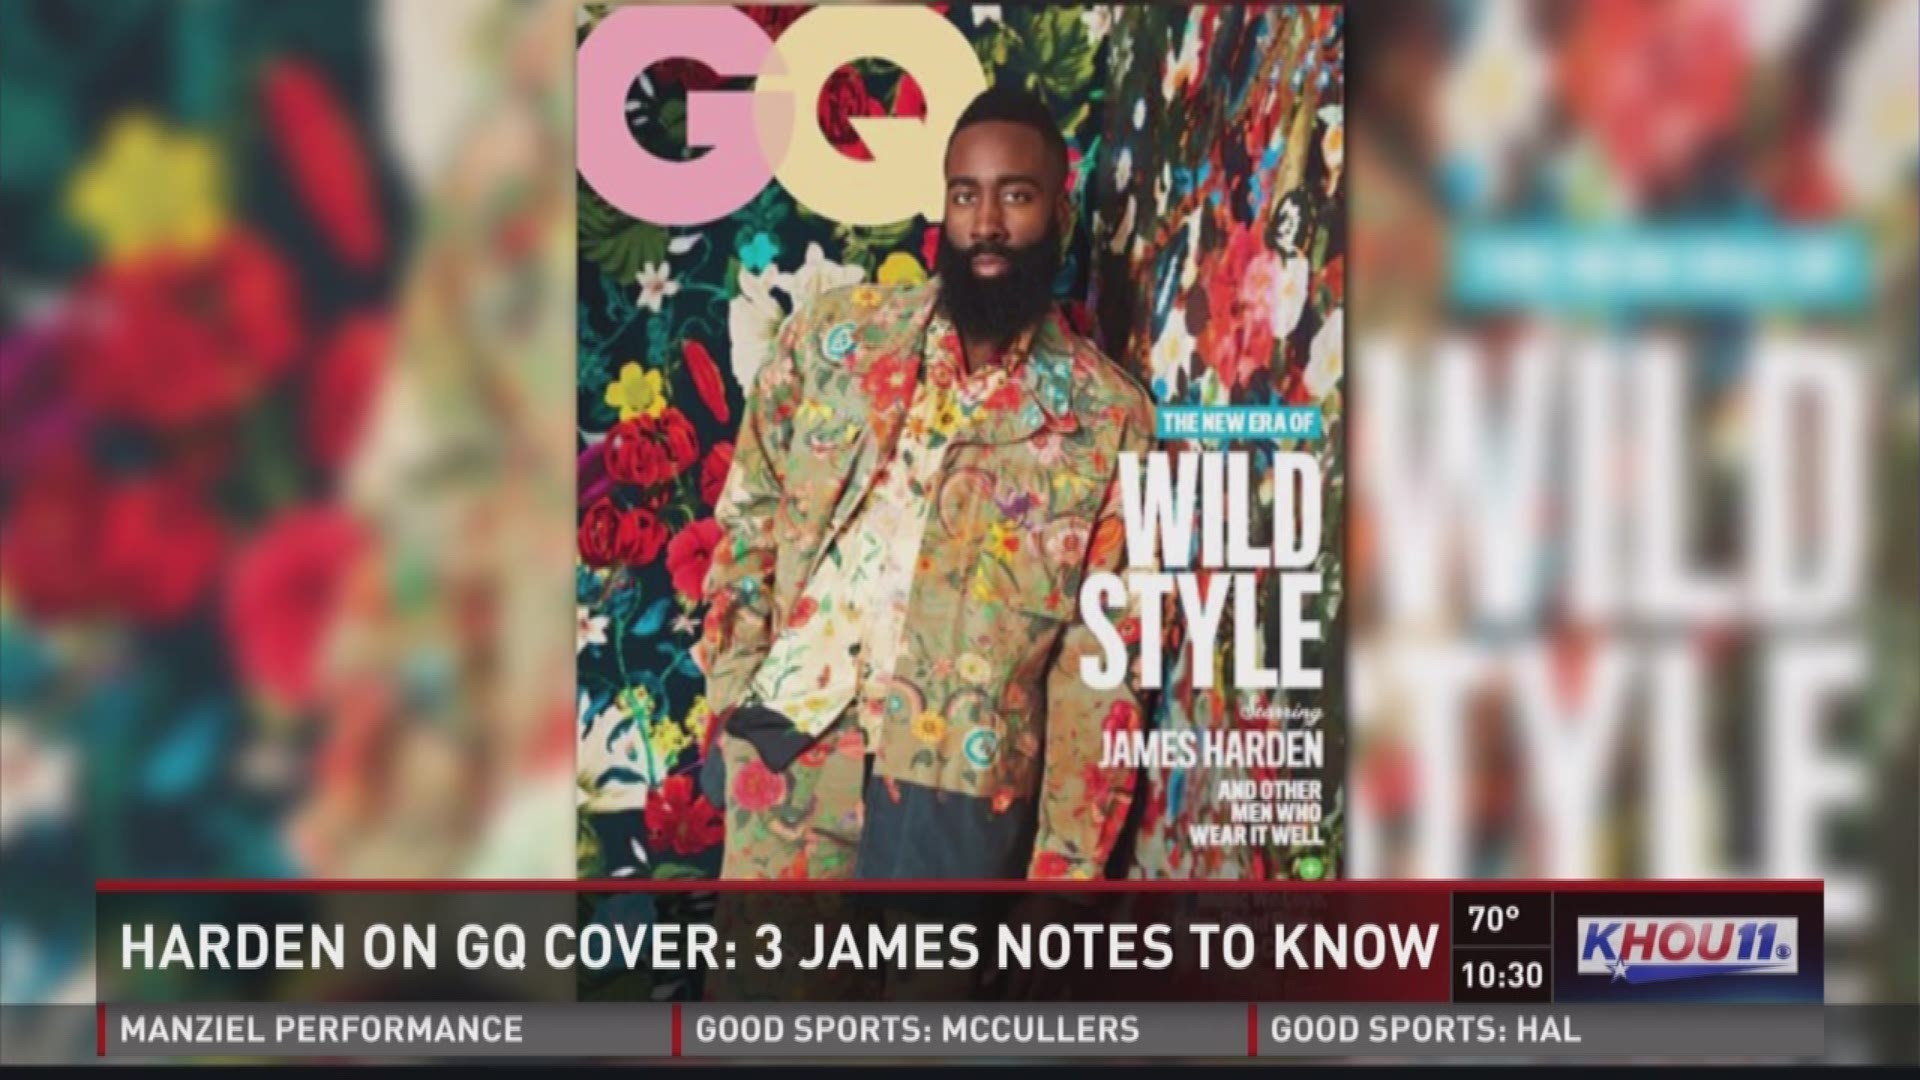 Harden on GQ Cover: 3 James notes to know